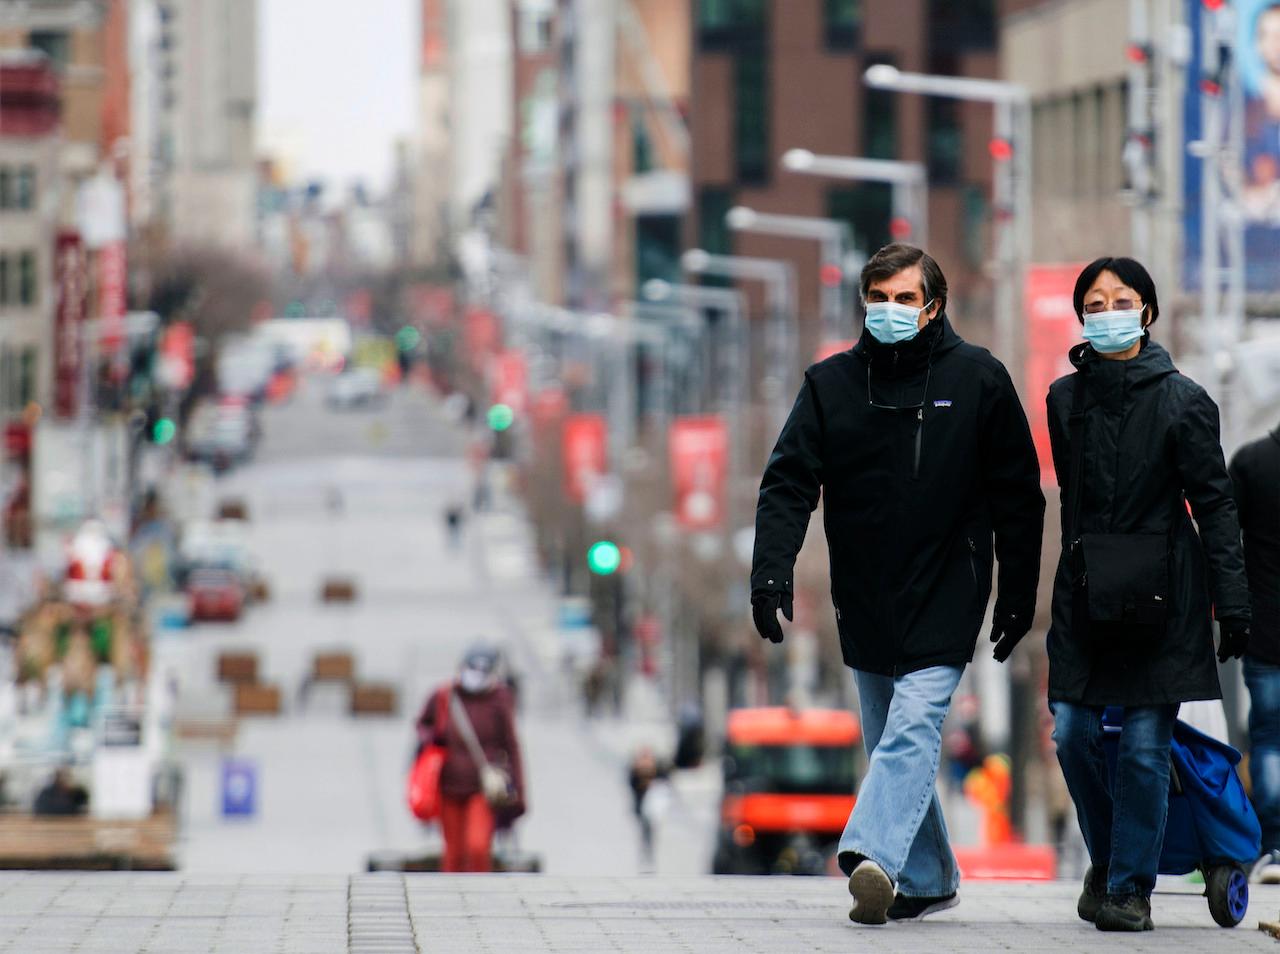 People wear face masks as they walk along a street in Montreal, Nov 22. Photo: AP